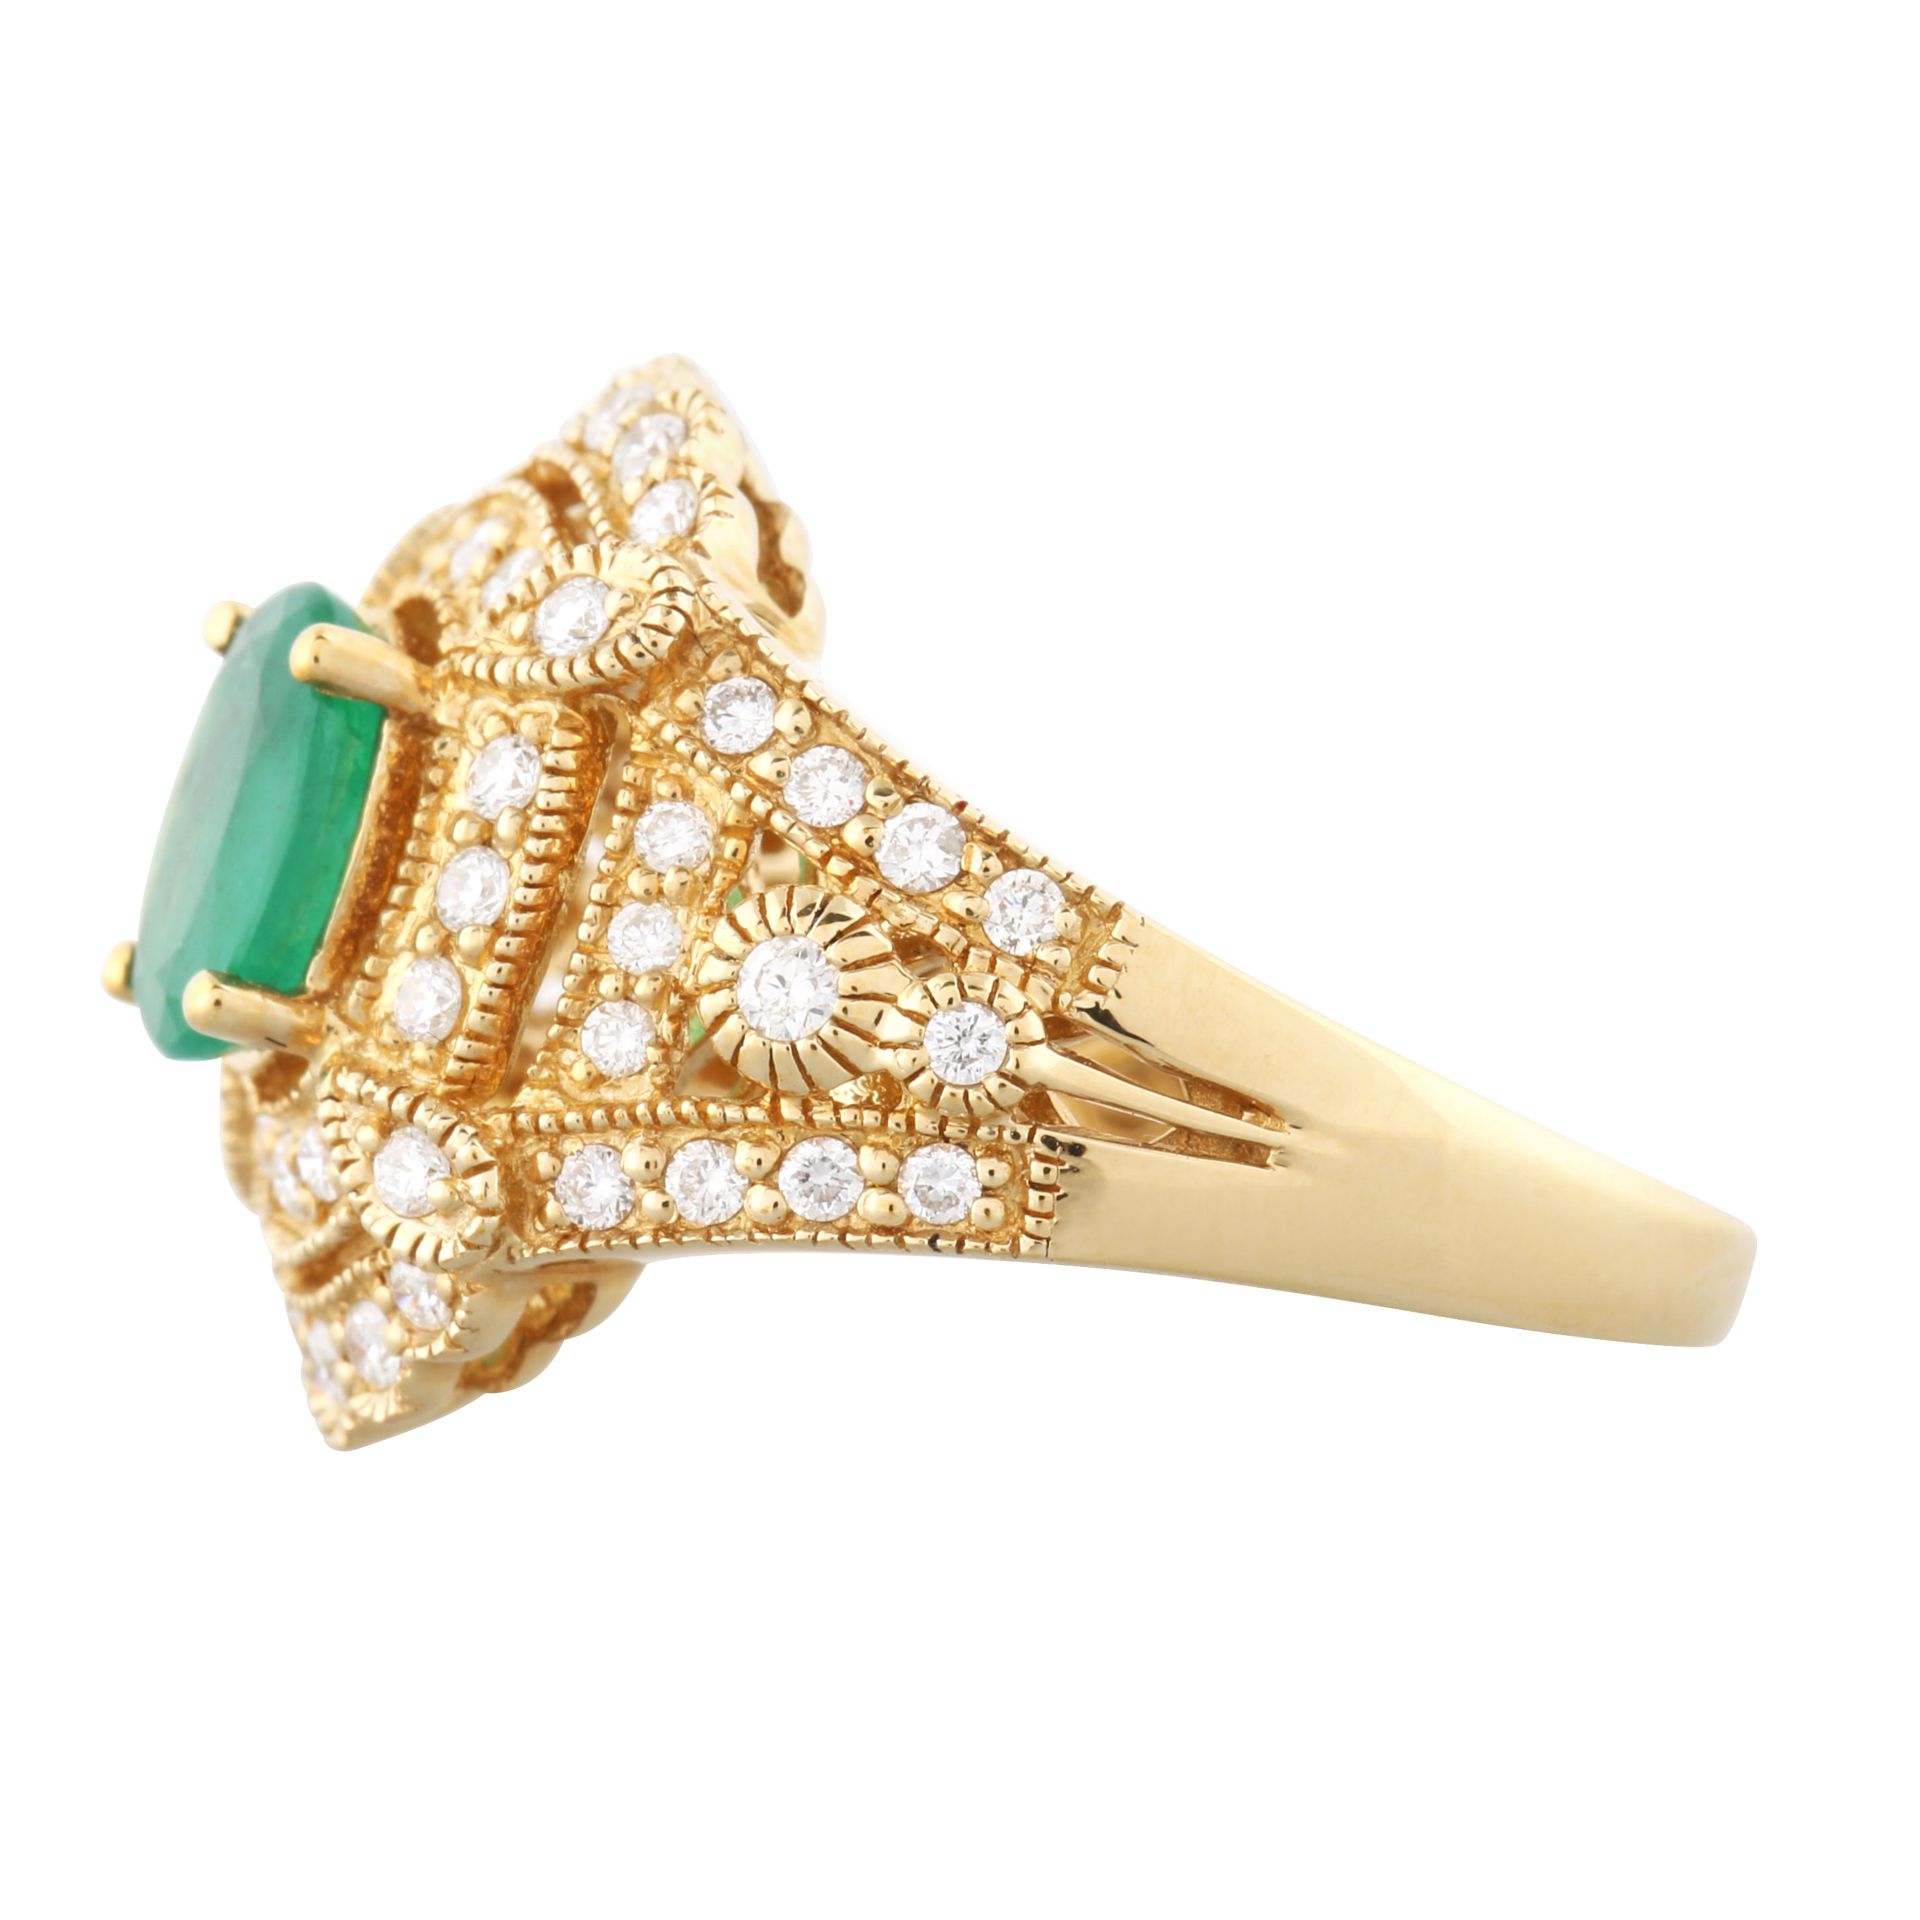 EMERALD AND DIAMOND 14KT GOLD RING - Image 2 of 4